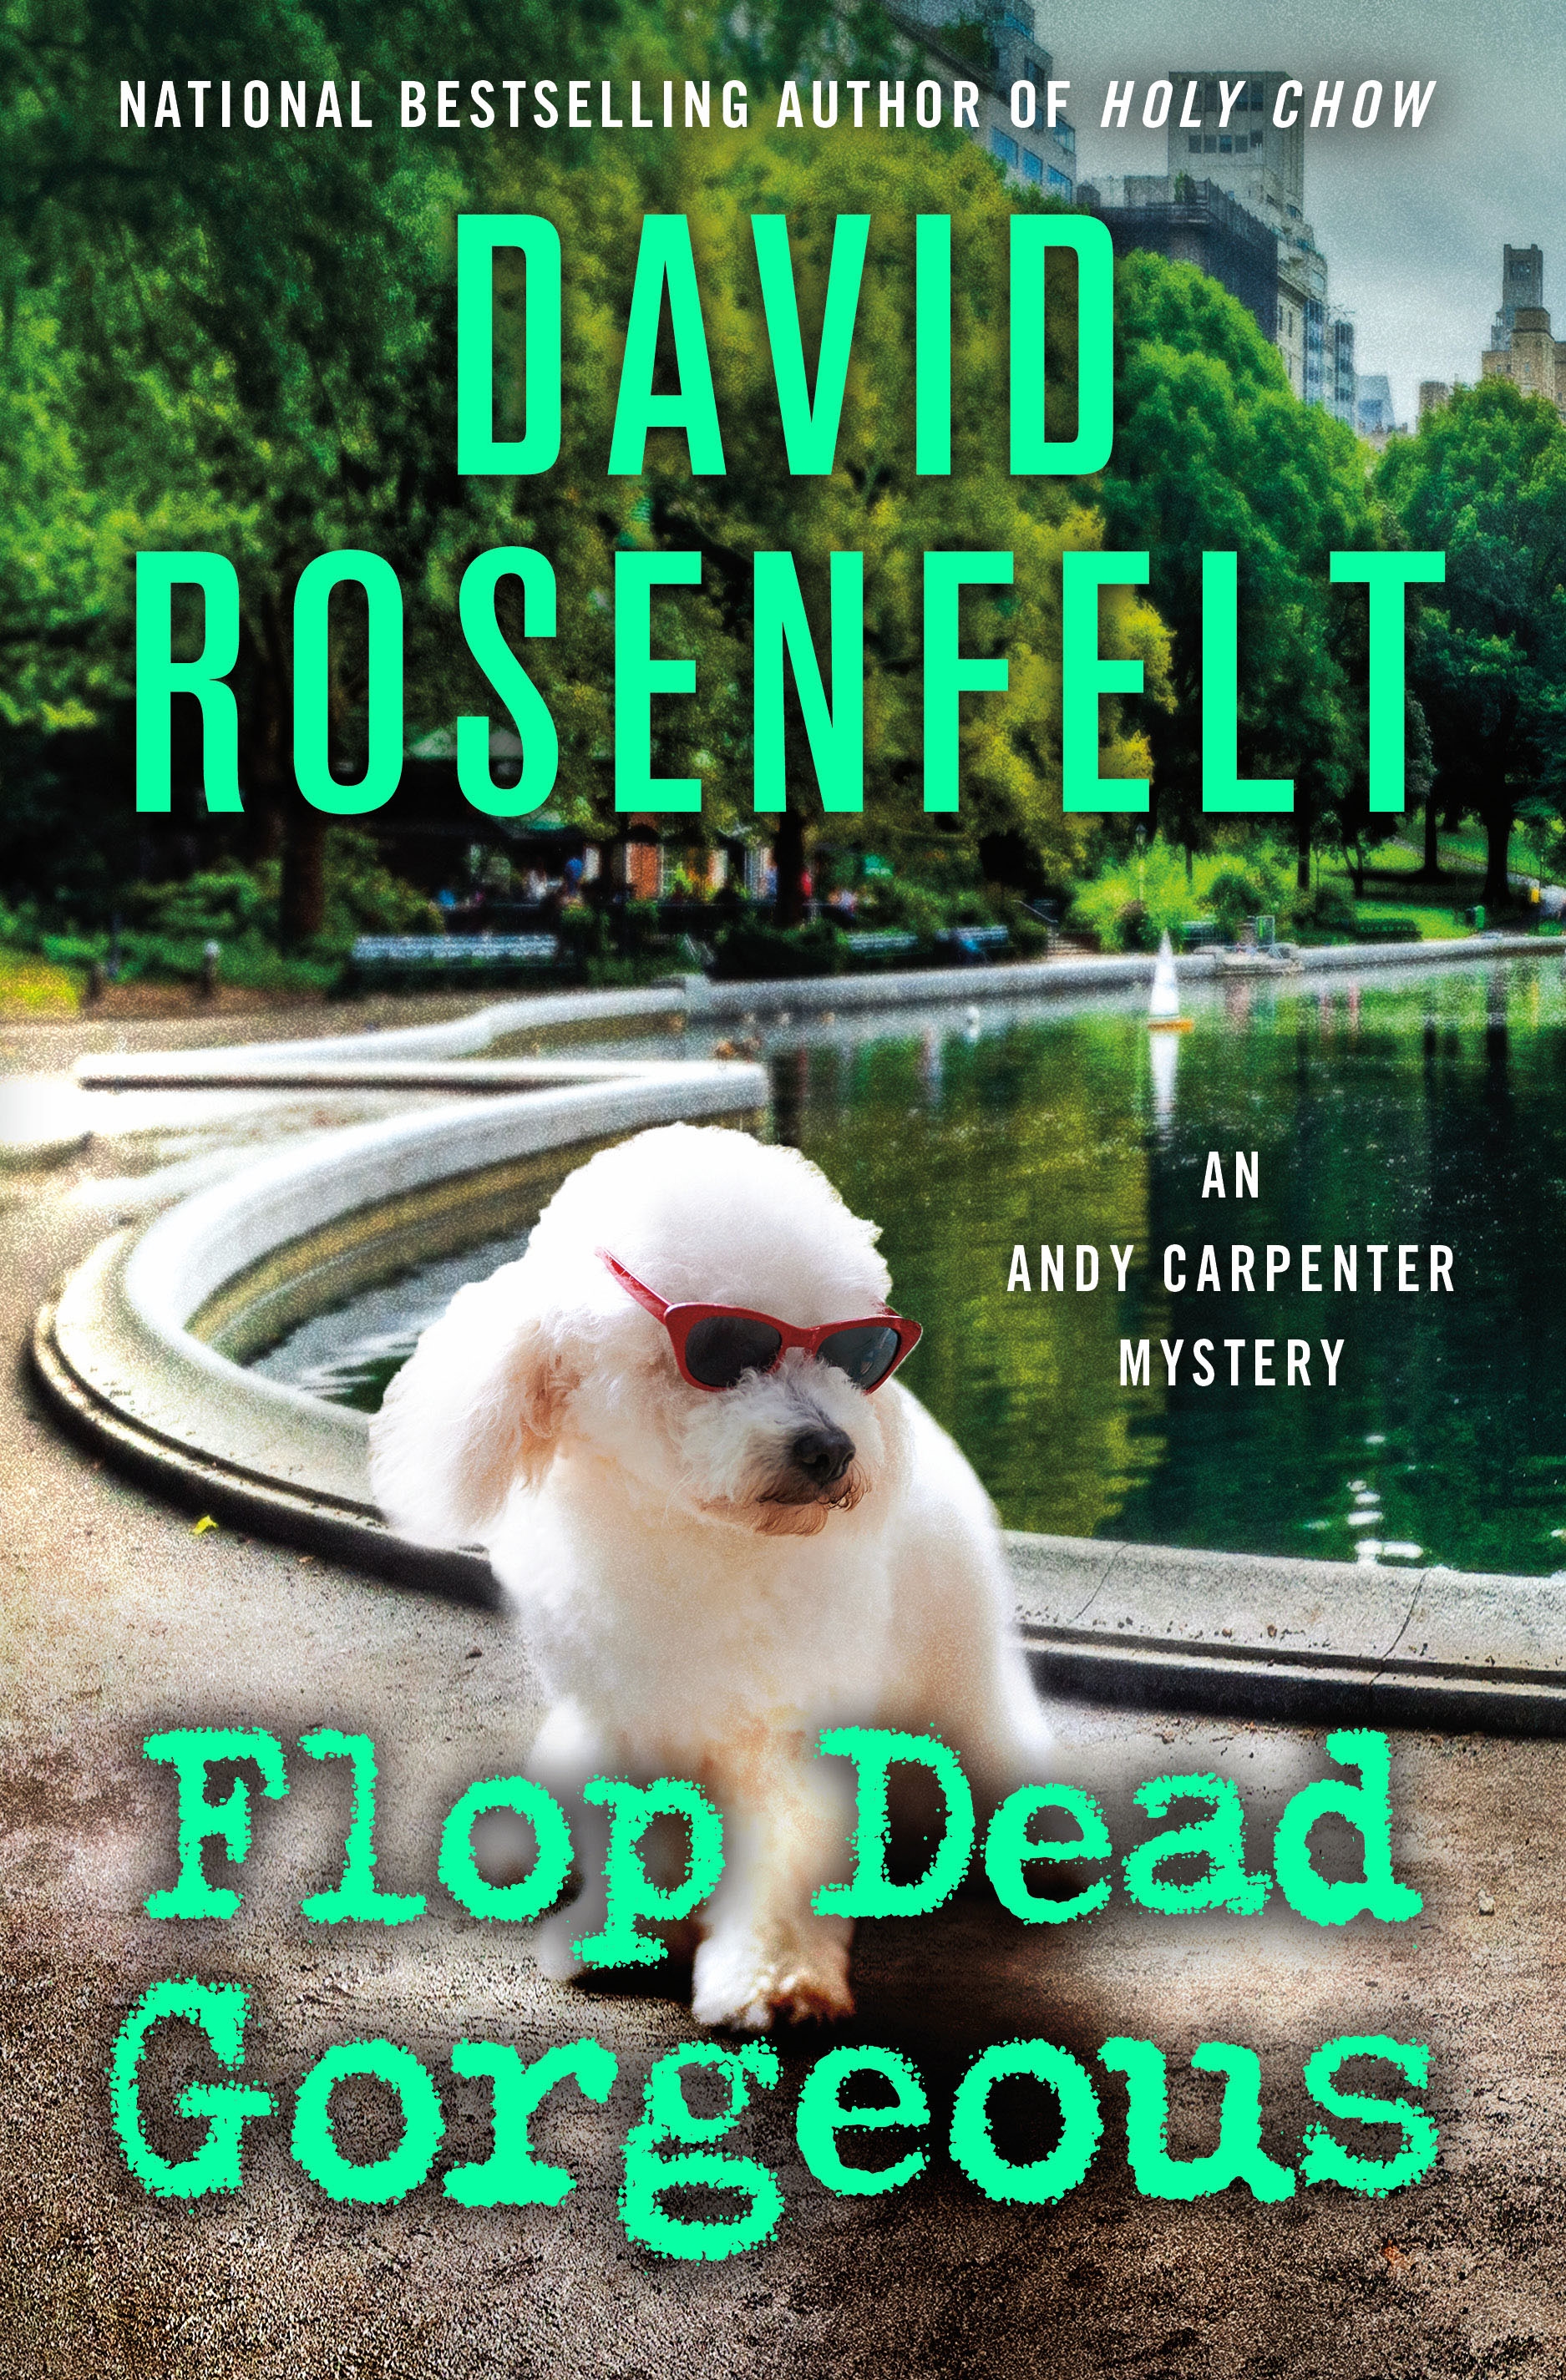 Flop Dead Gorgeous An Andy Carpenter Mystery cover image